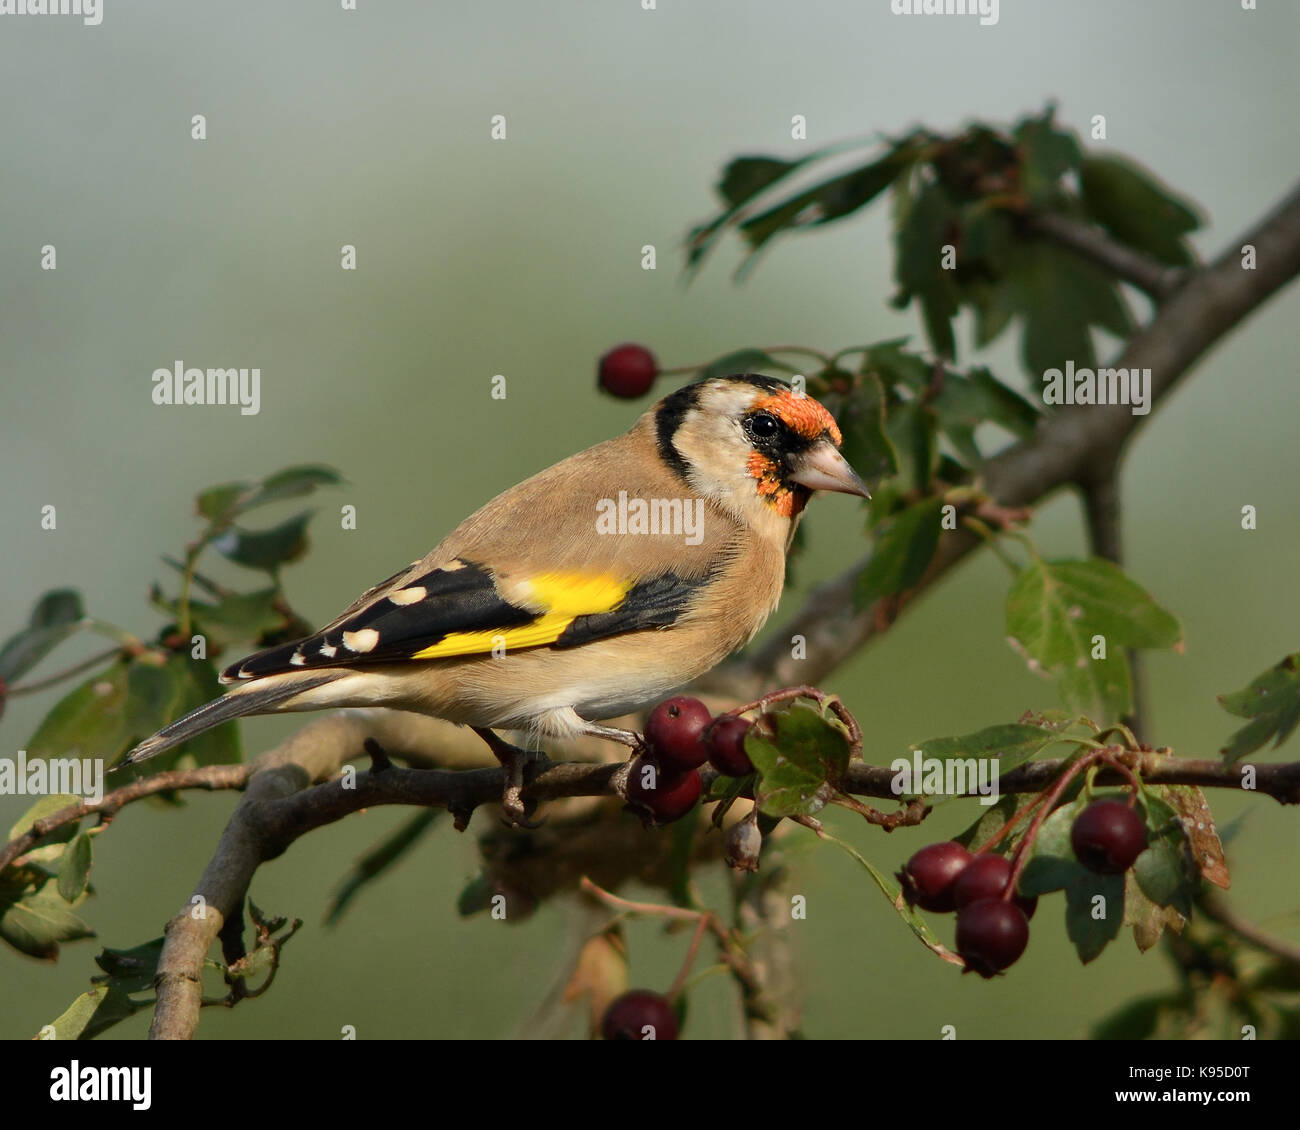 European goldfinch common garden bird pictured in a natural dappled sunlight light in England UK on hawthorn tree, with berries Stock Photo